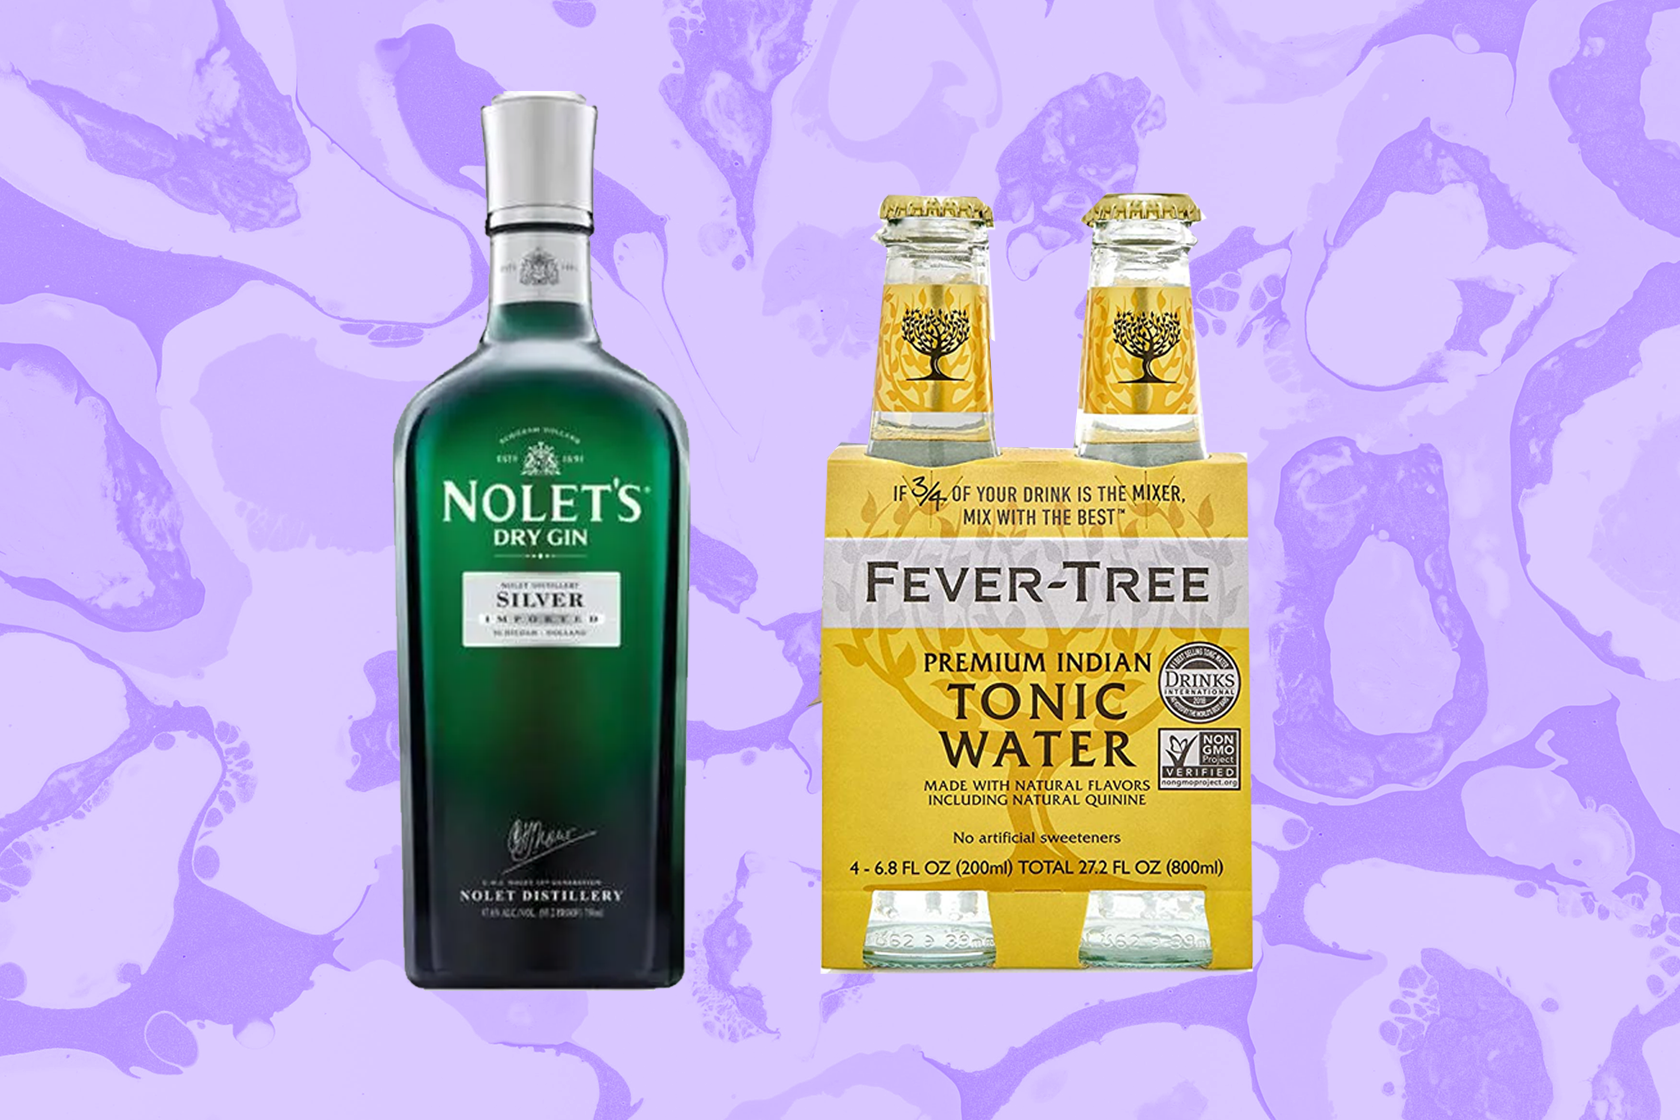 gin-and-tonic holiday for Perfect the pairings season